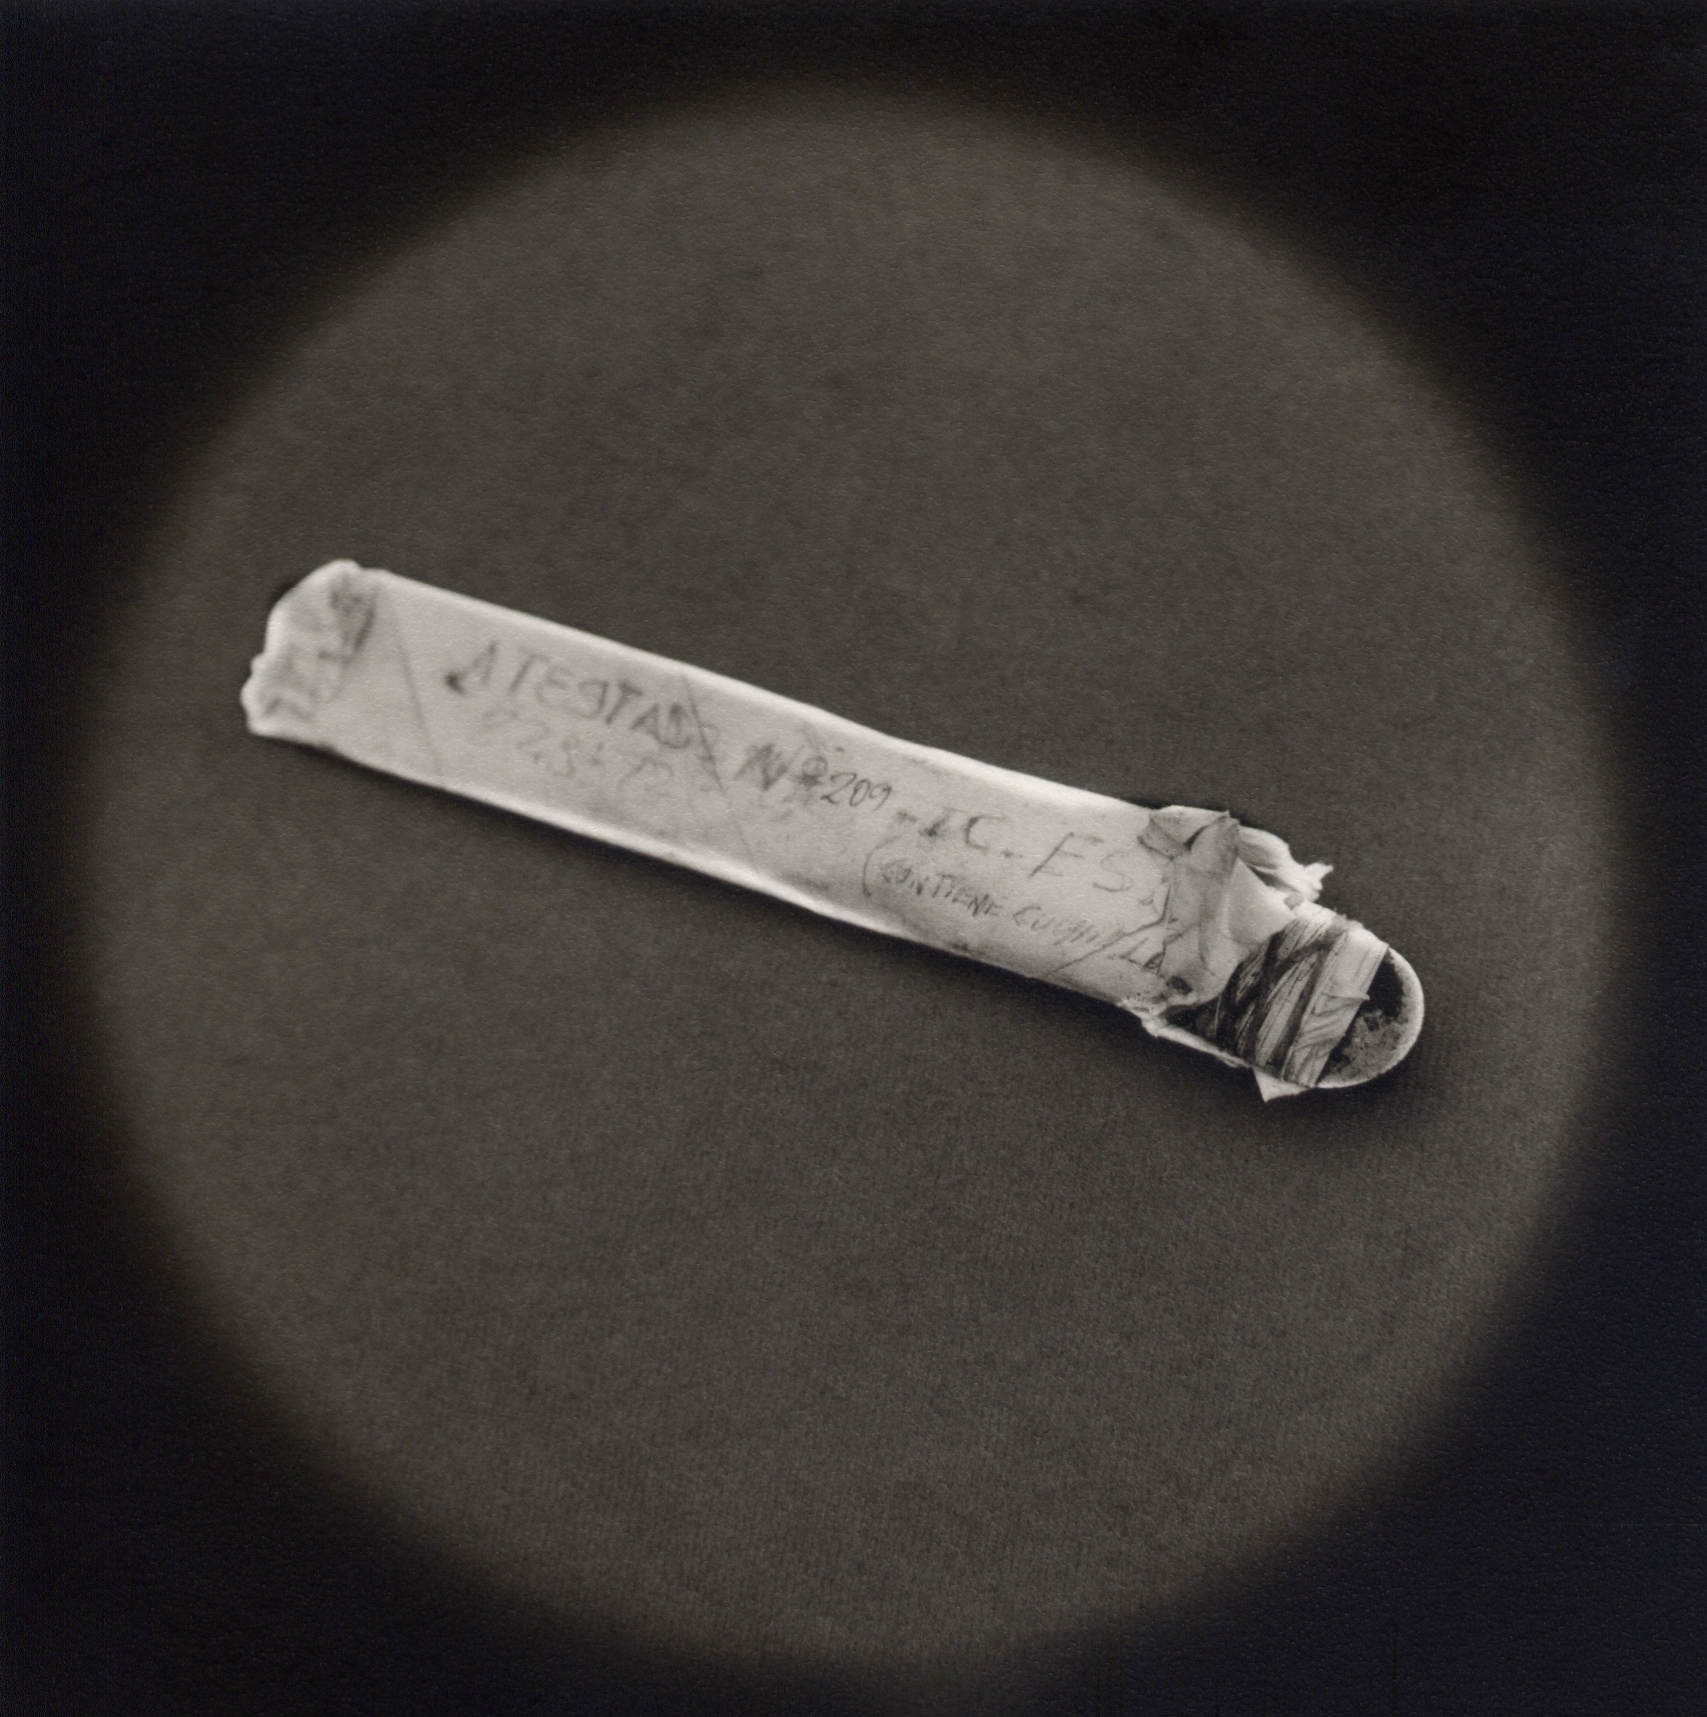   Crudely fabricated knife confiscated as evidence   Toned gelatin silver print.   16 x 16 in. (40 x 40 cm.) 